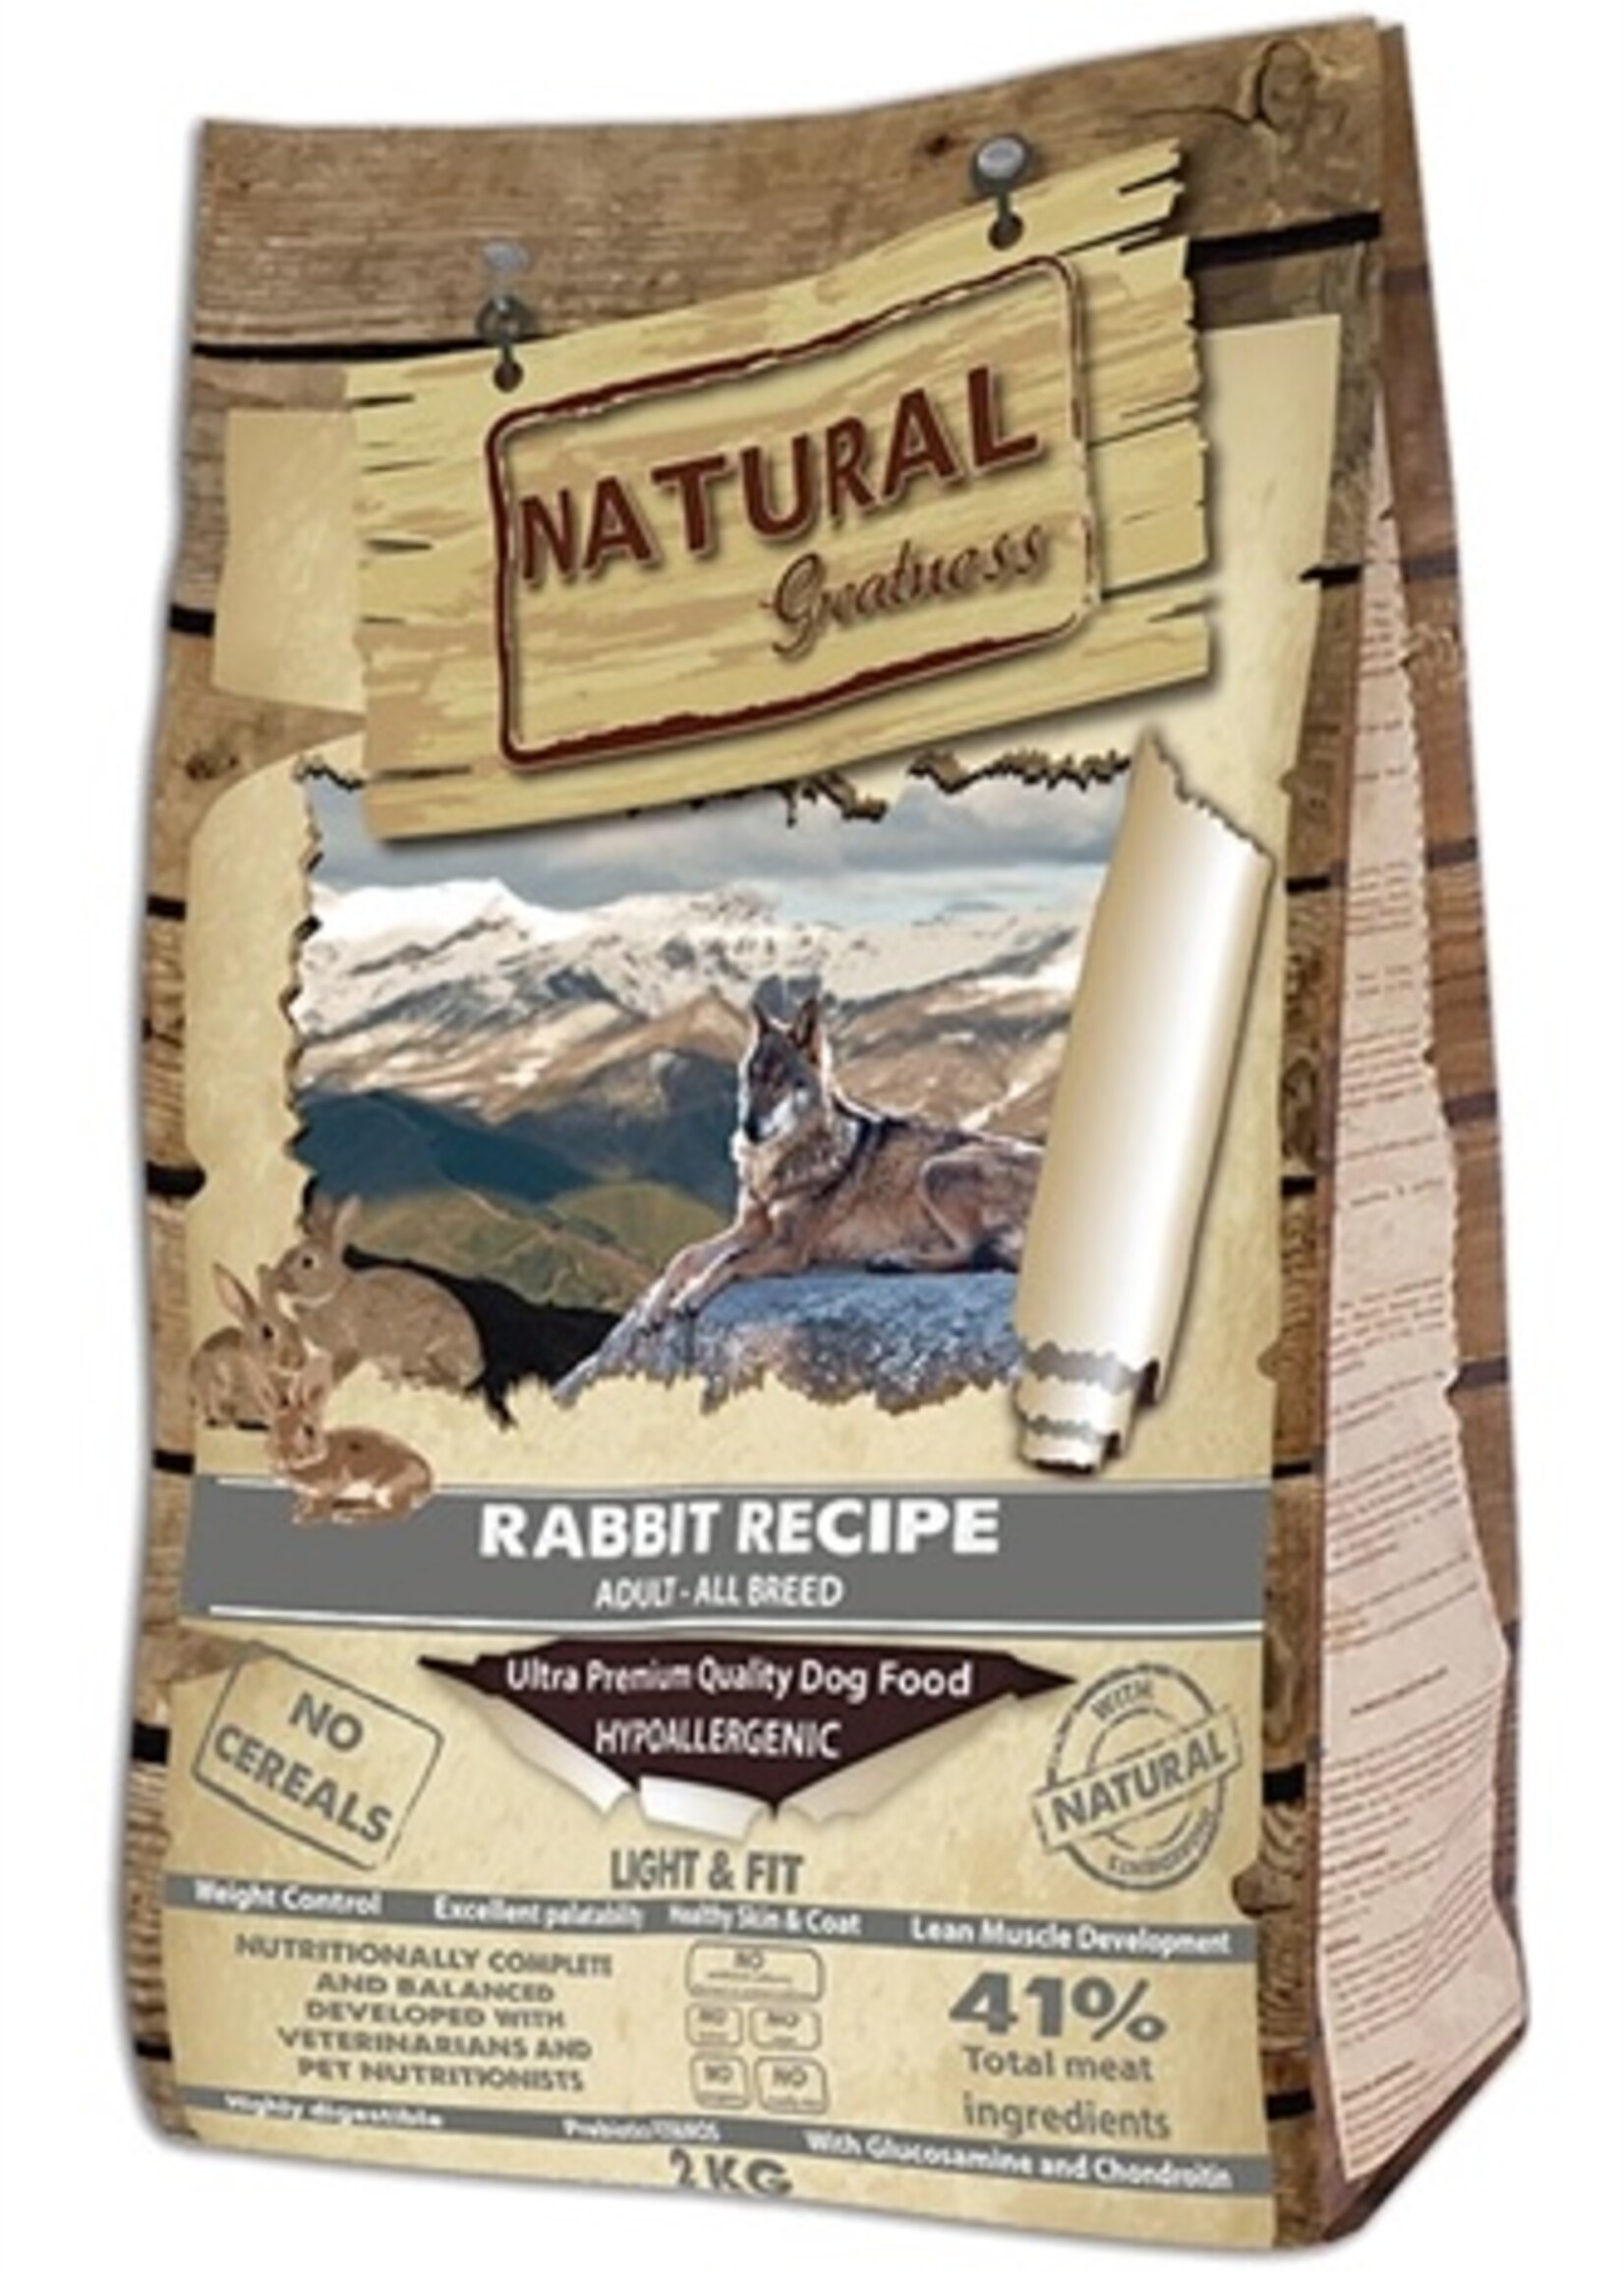 Natural greatness Natural greatness rabbit light & fit recipe